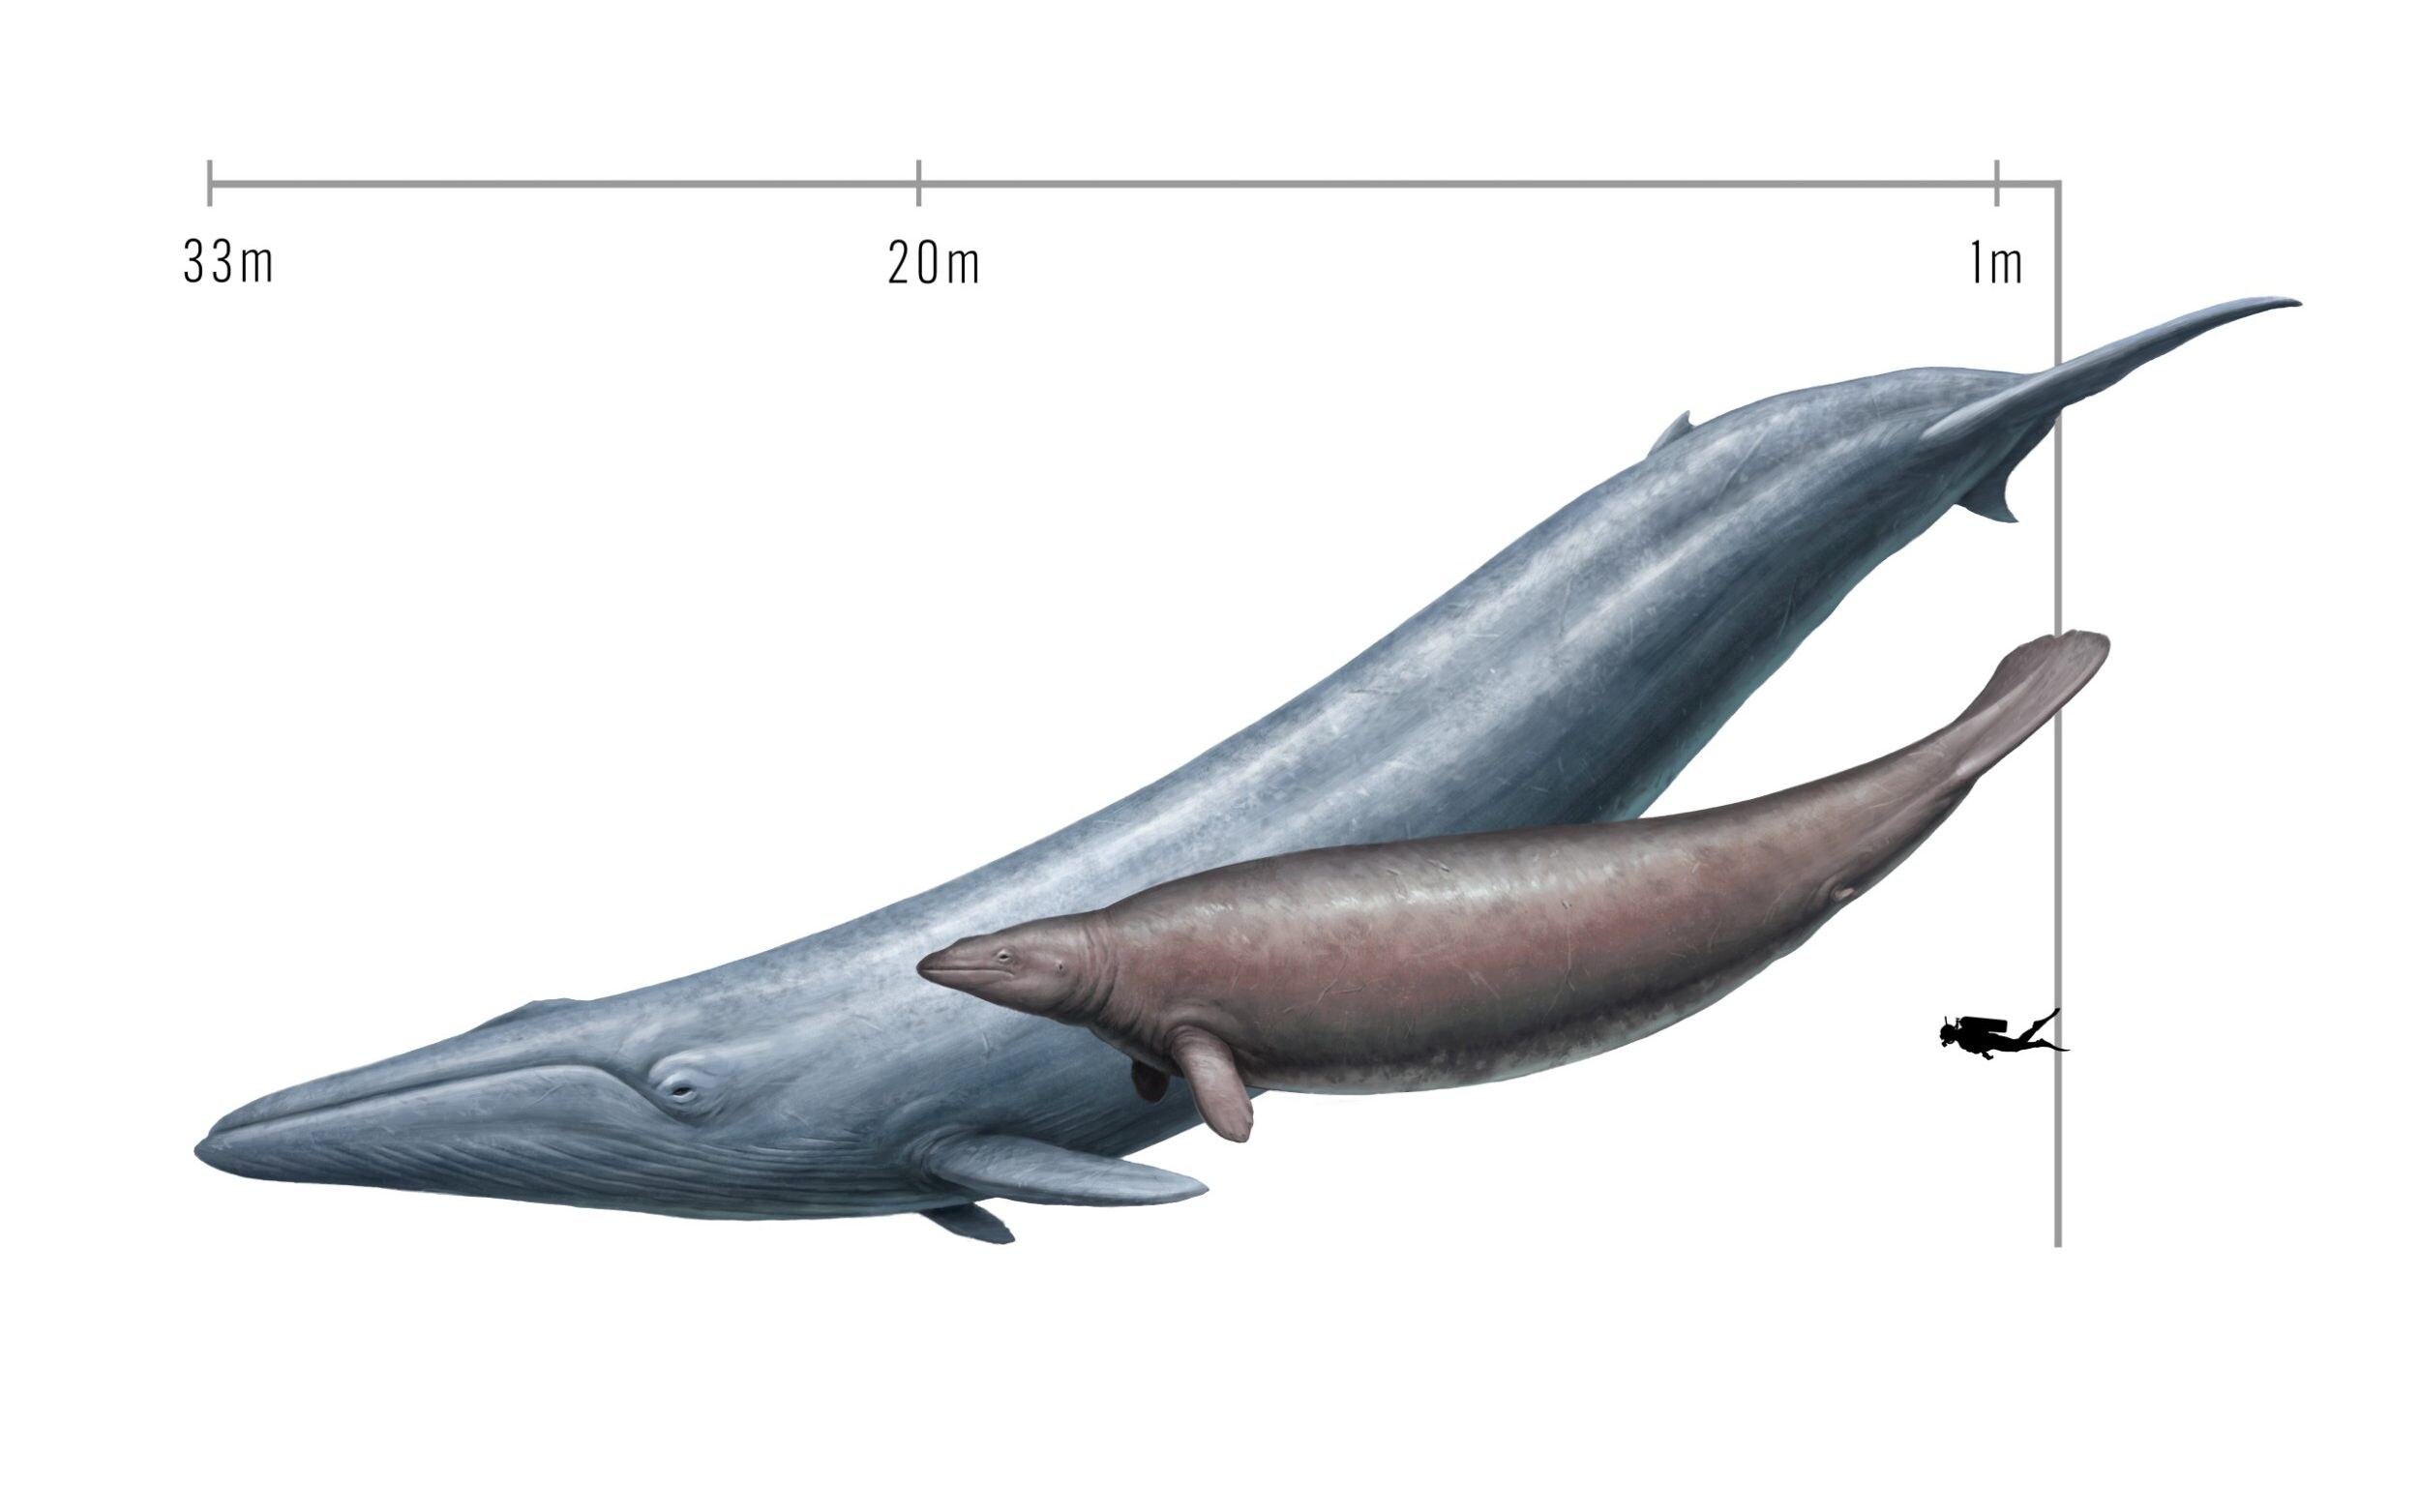 blue whale may be heaviest animal ever, scientists discover